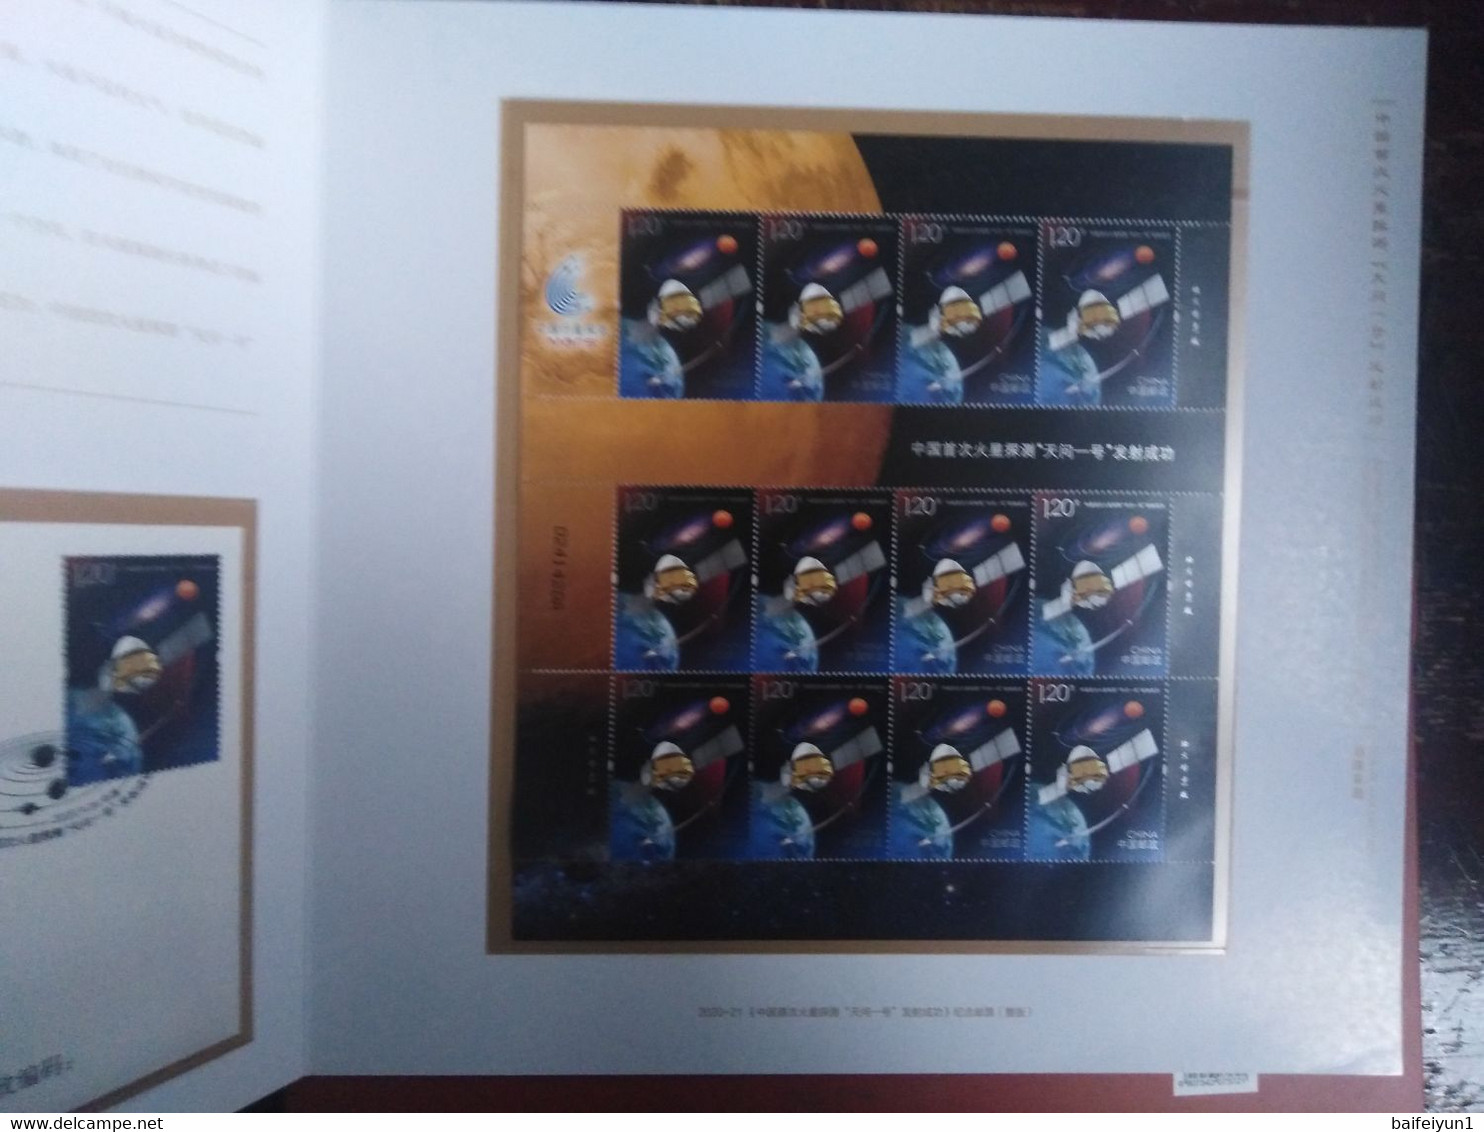 China 2020-21 The Successful of Launch the Tian Wen-1 Mars Spacecraft stamp  Full sheet and FDC Folder